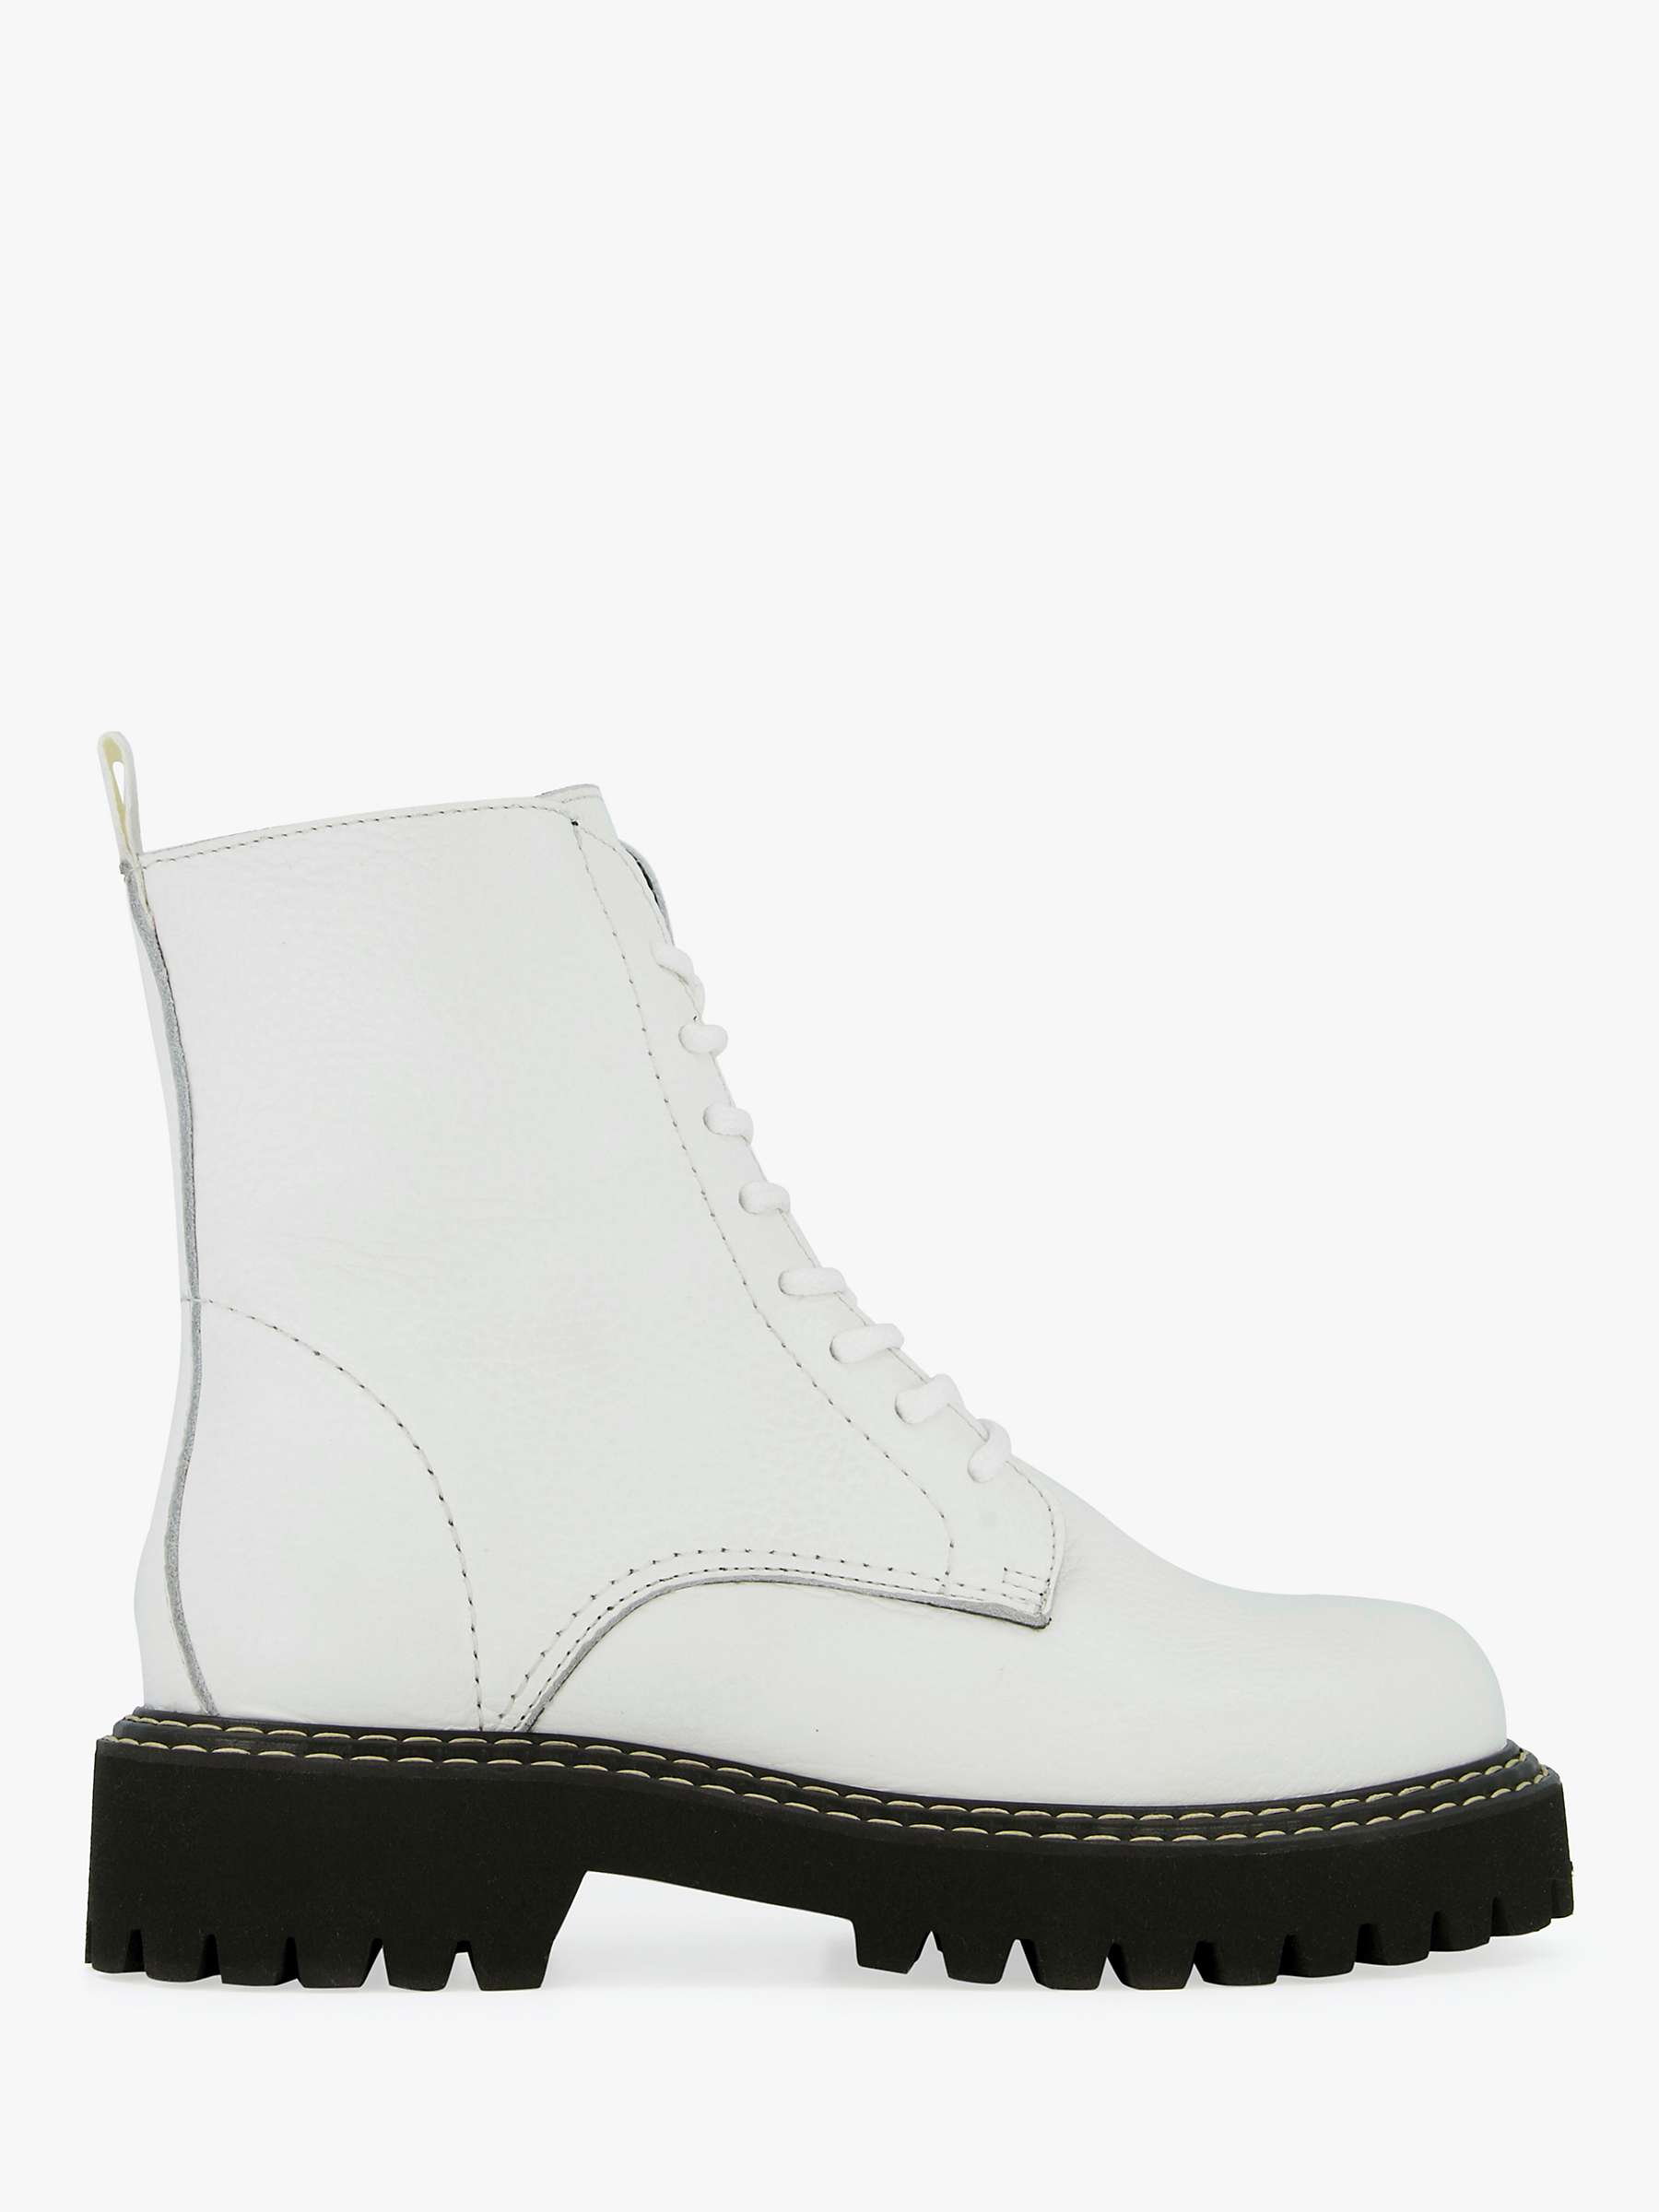 Buy Dune Pumba Leather Cleated Sole Hiker Boots, White Online at johnlewis.com